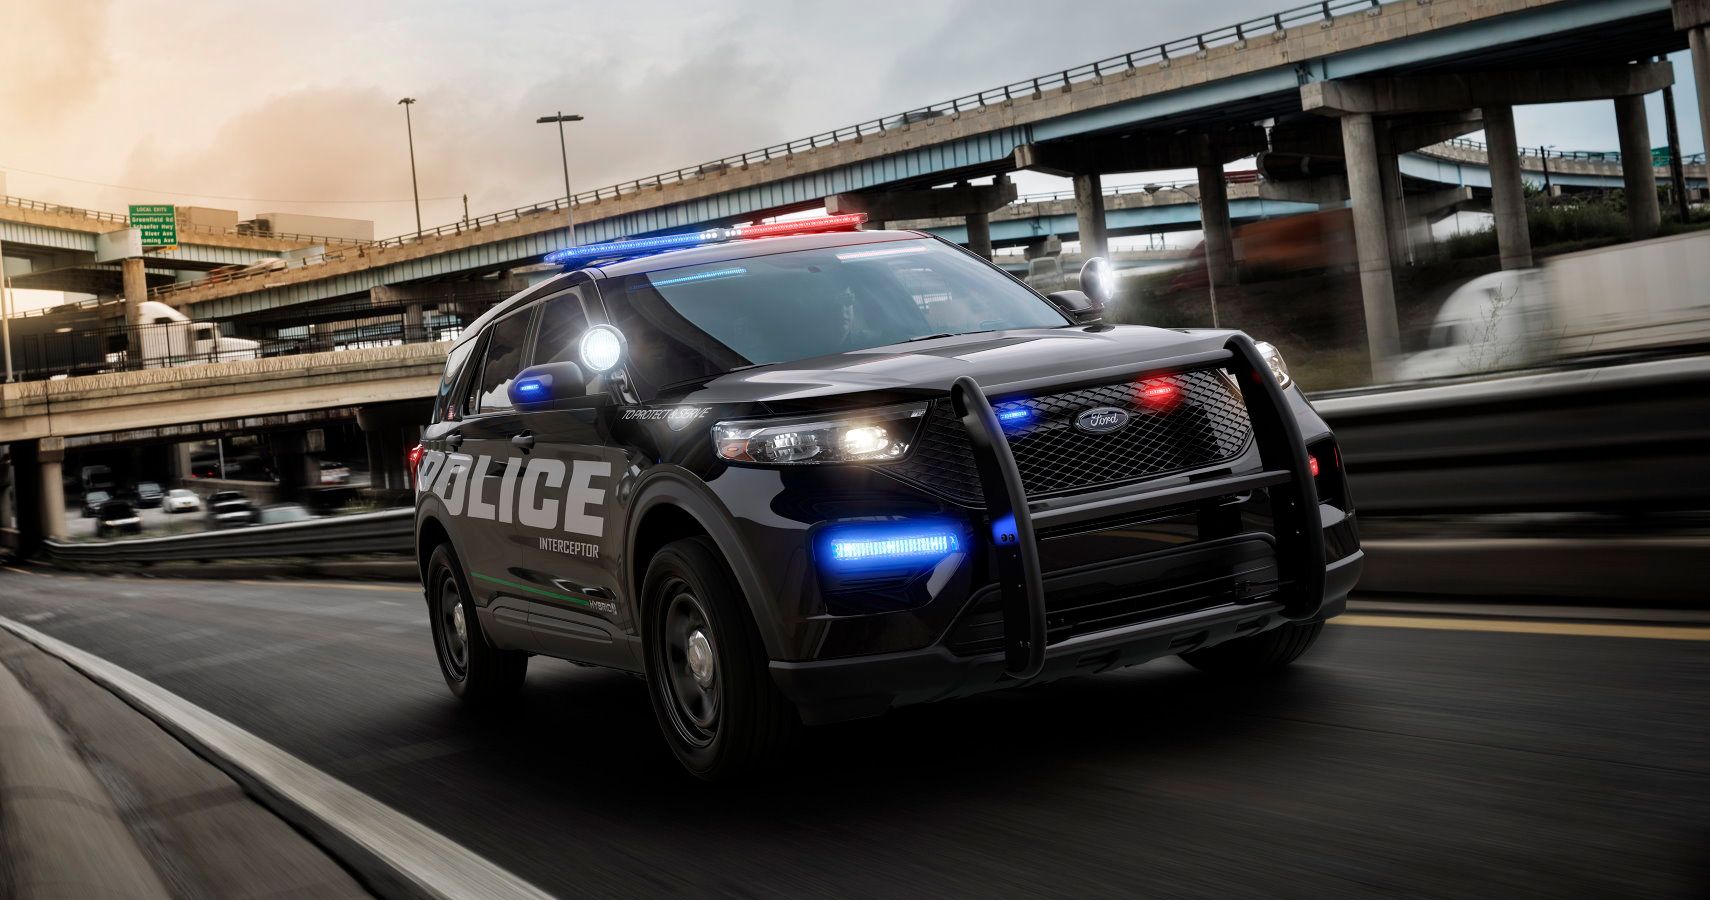 While actual mileage will vary, all-new Police Interceptor Utility Hybrid has an EPA-estimated rating of 23 mpg city/24 mpg highway/24 mpg combined ??? a 41 percent improvement over the current Police Interceptor Utility equipped with a conventional 3.7-liter gas engine ??? and is projected to save taxpayers between $3,500 and $5,700 per vehicle in fuel costs annually